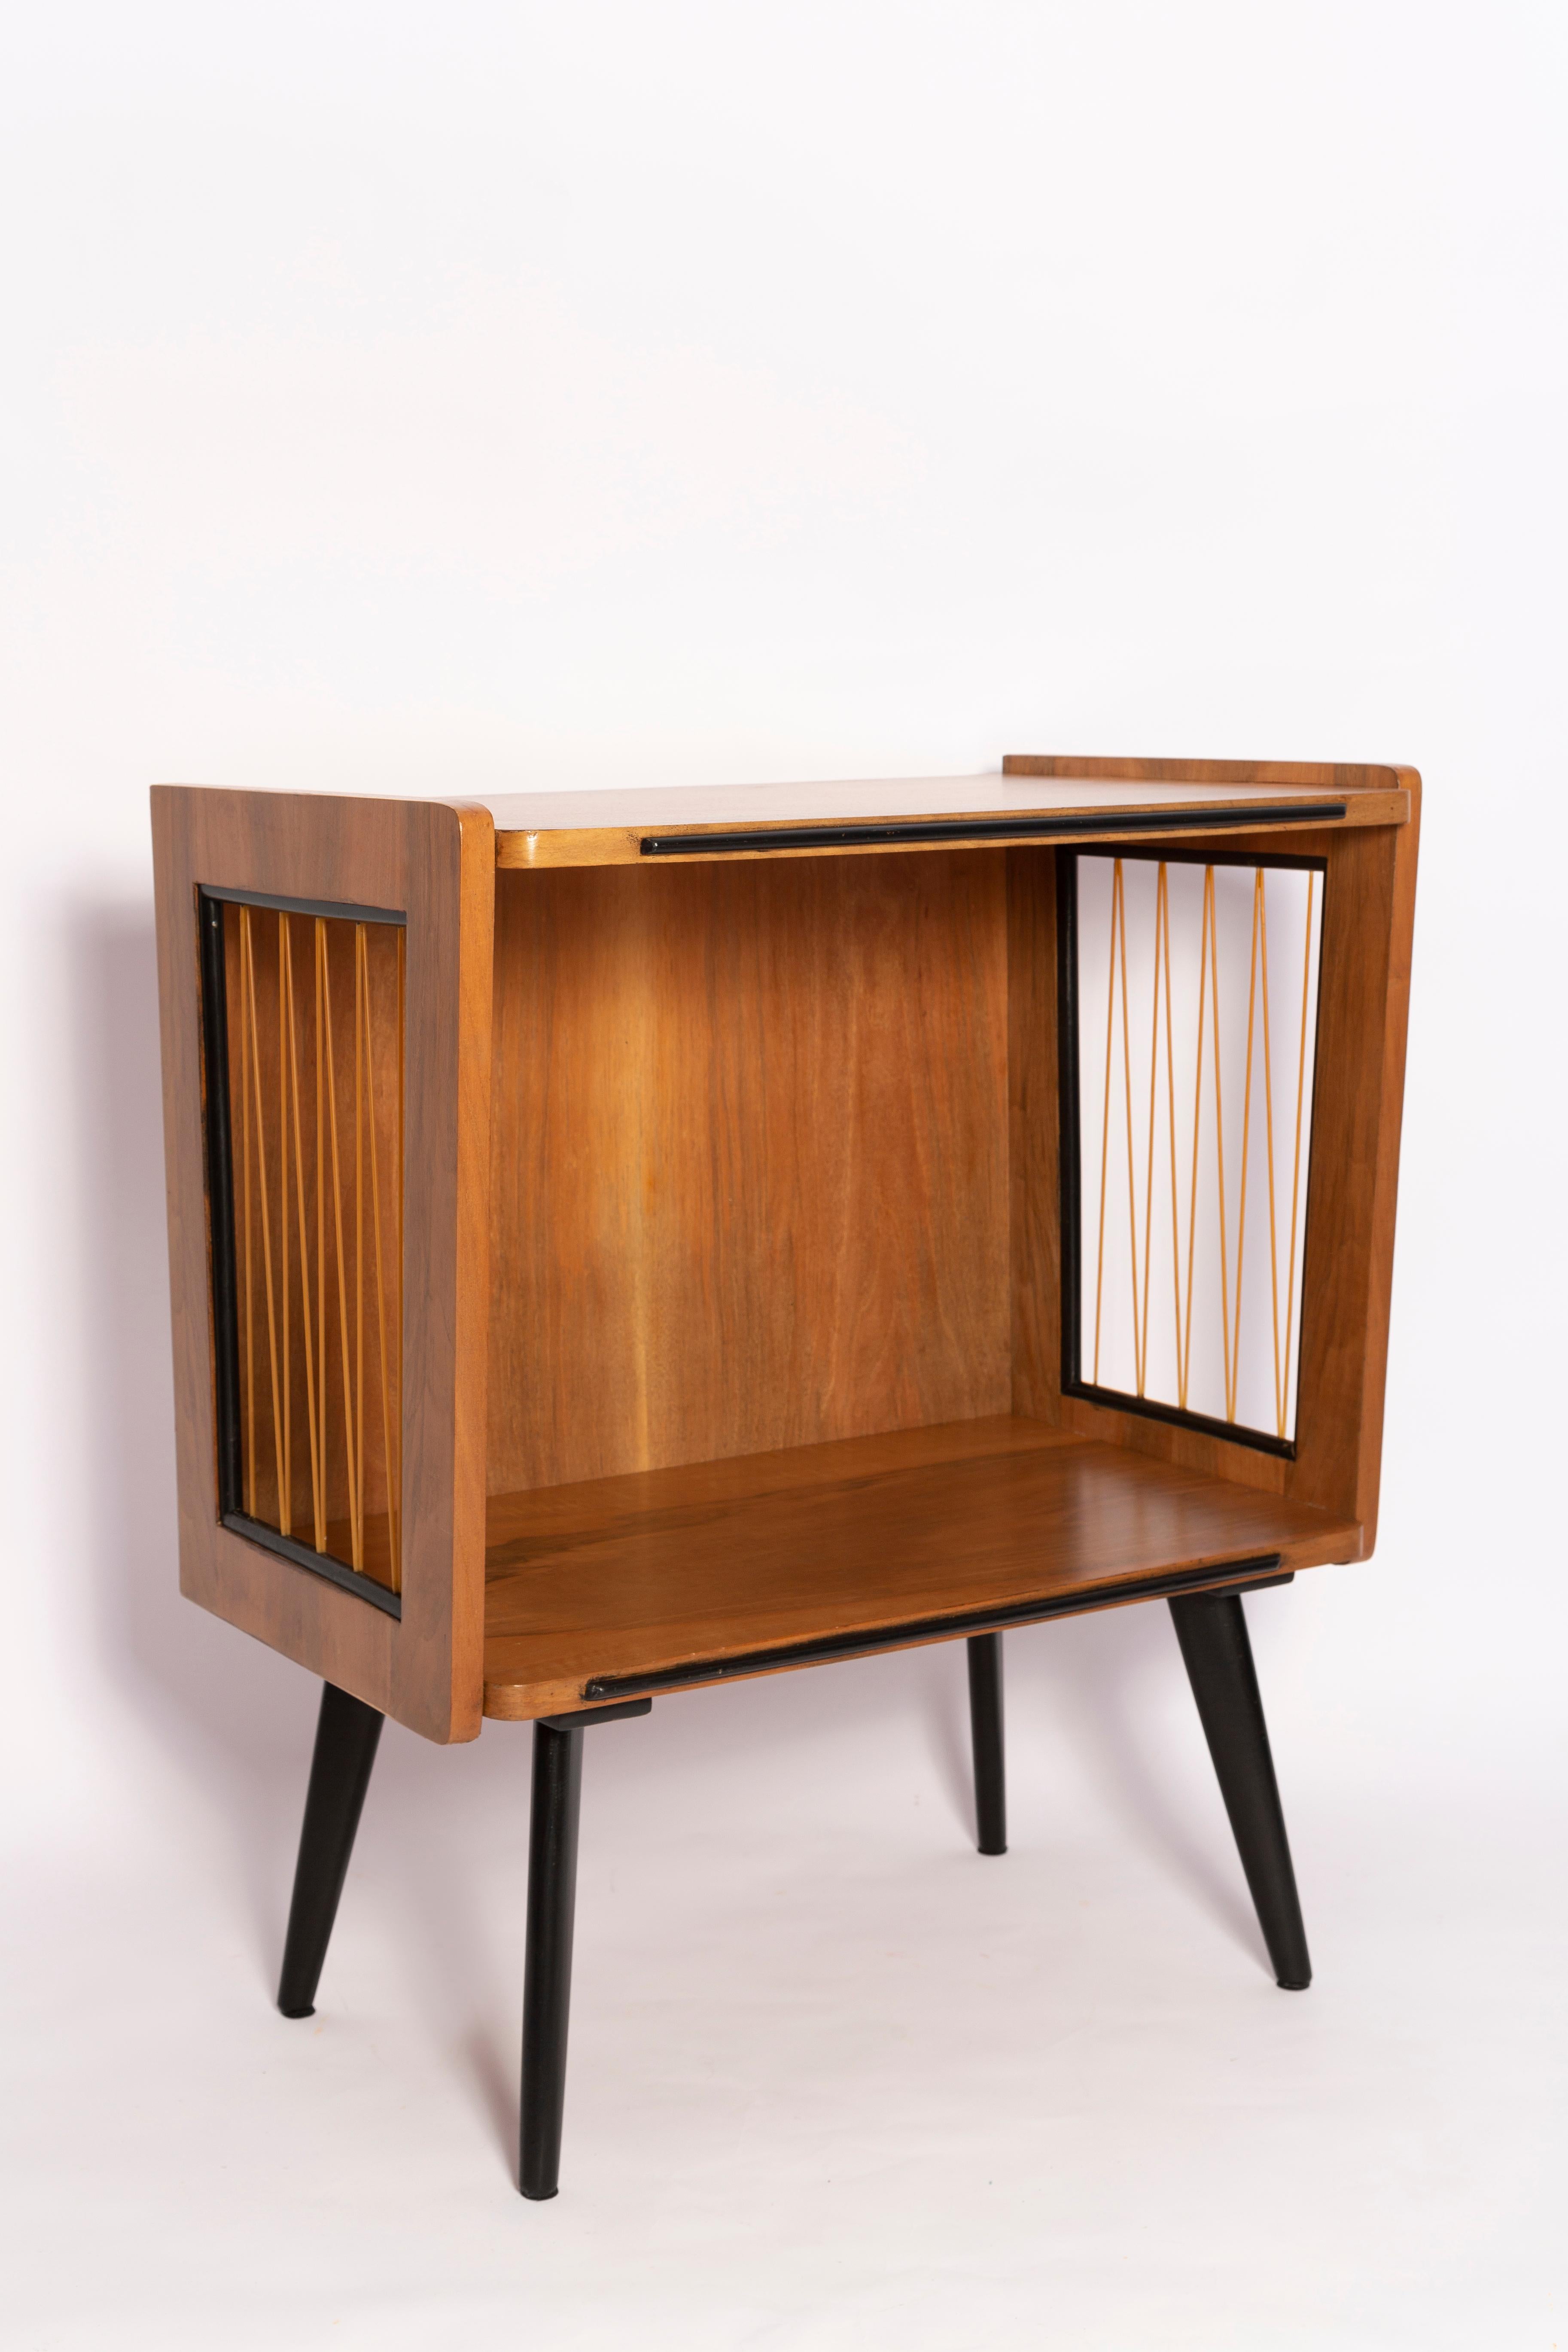 TV side table from the 1960s. It was manufactured in Poland in 1960s. The table was made of beechwood, it was also full renovated. Excellent condition.